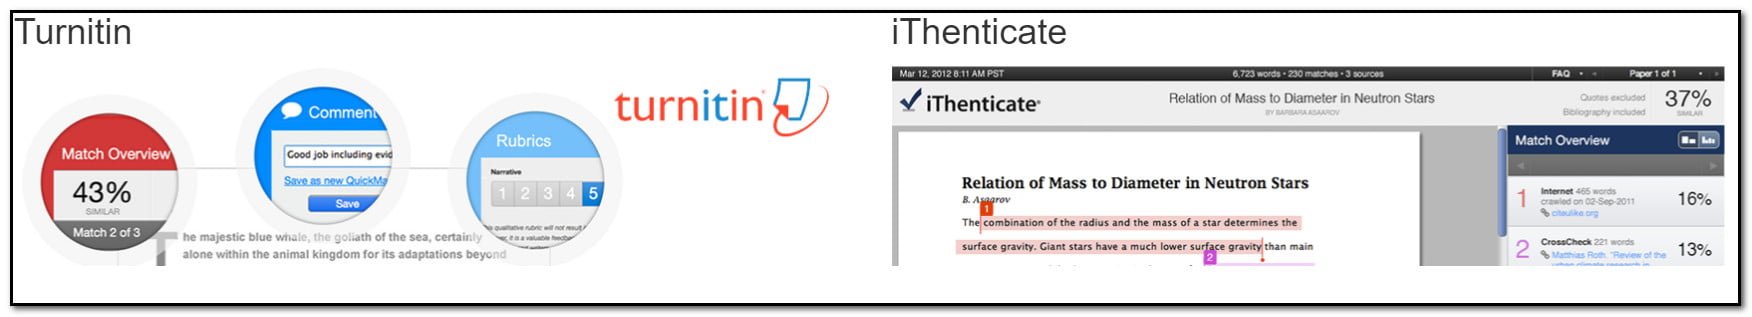 ithenticate software download